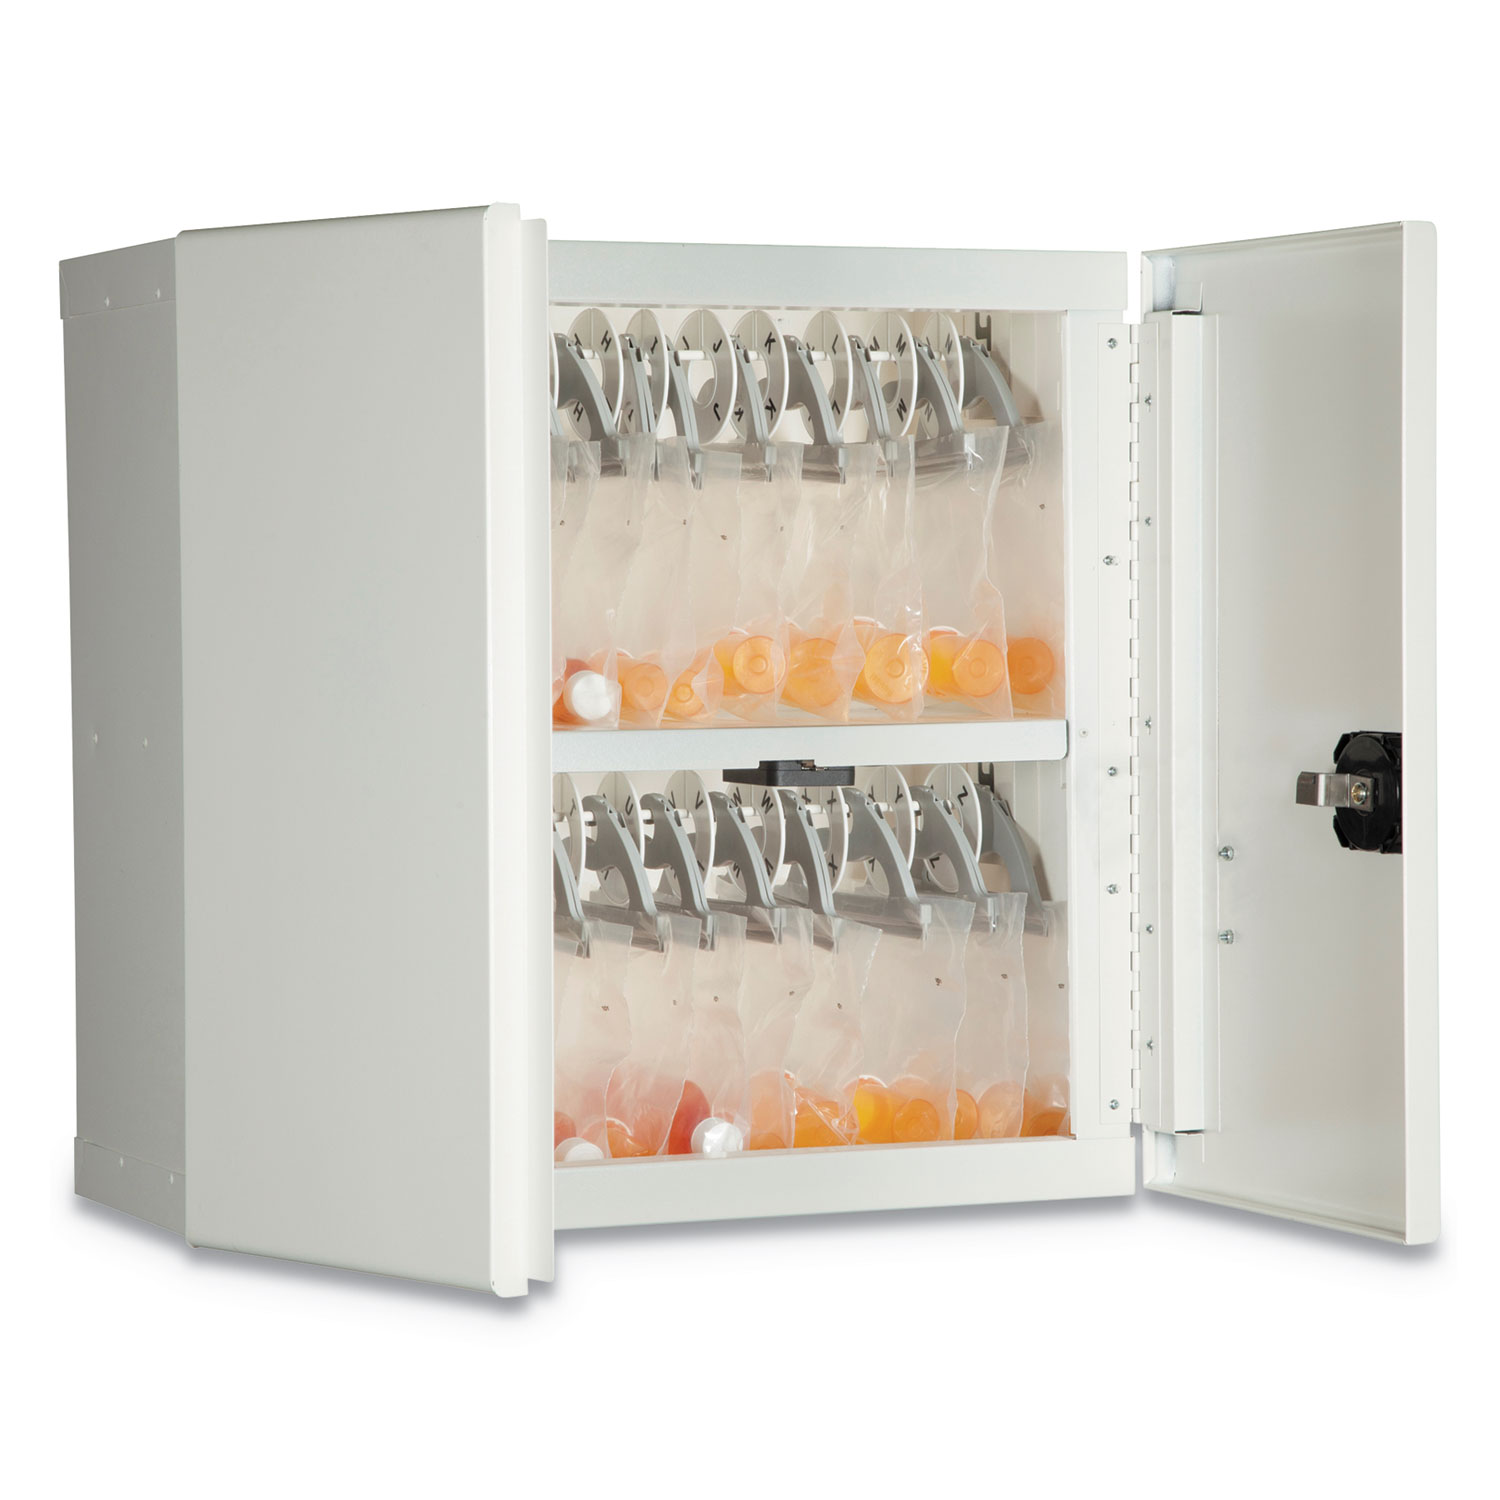 Medical Storage Cabinet with Cam Lock, 24w x 24d x 13h, White